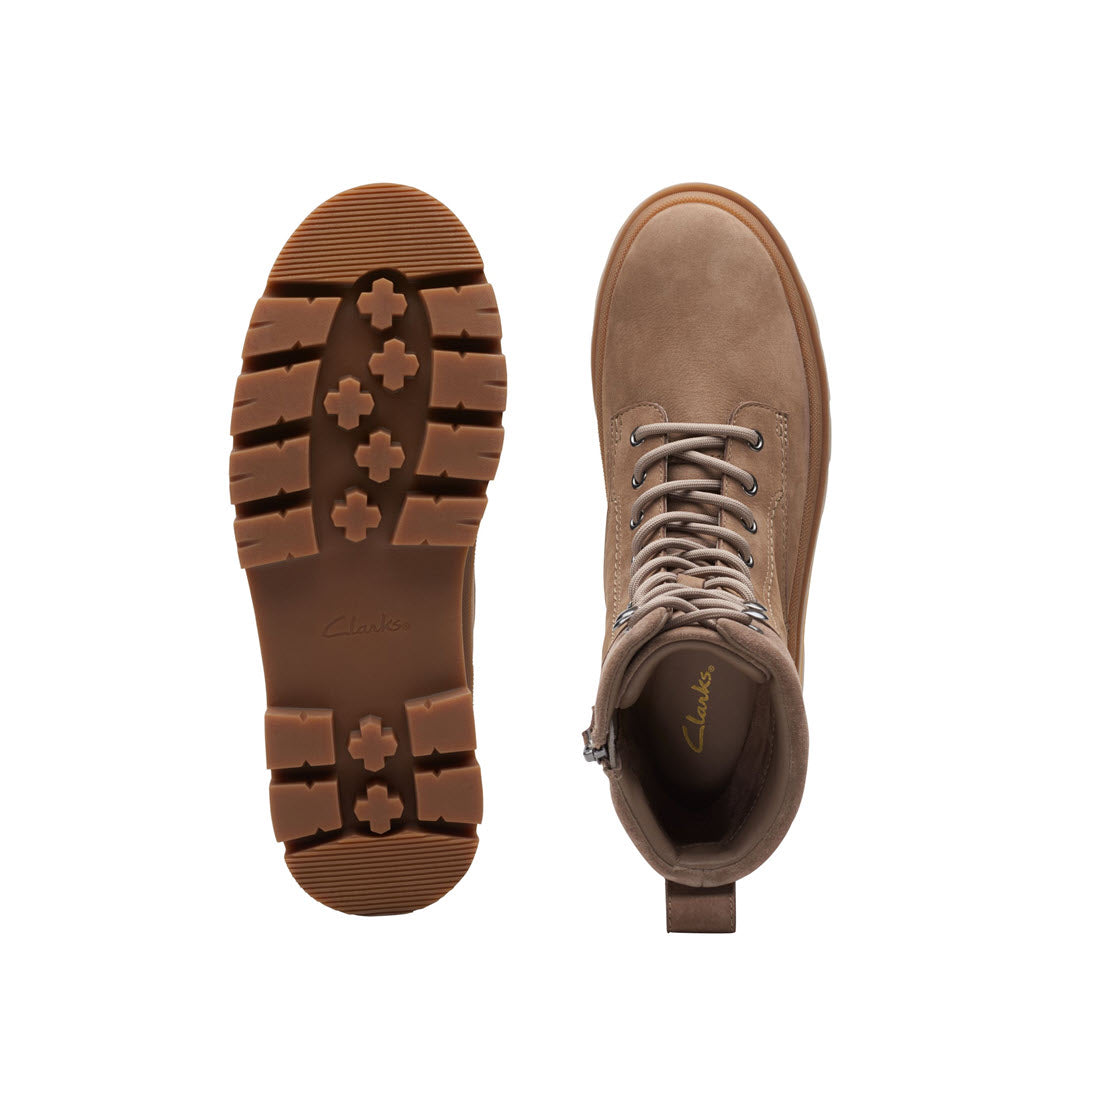 A pair of Clarks Orinna 2 Hike Pebble boots shown from the top and sole view, one upright and the other leaning on its side, featuring a chunky lugged sole, against a white background.